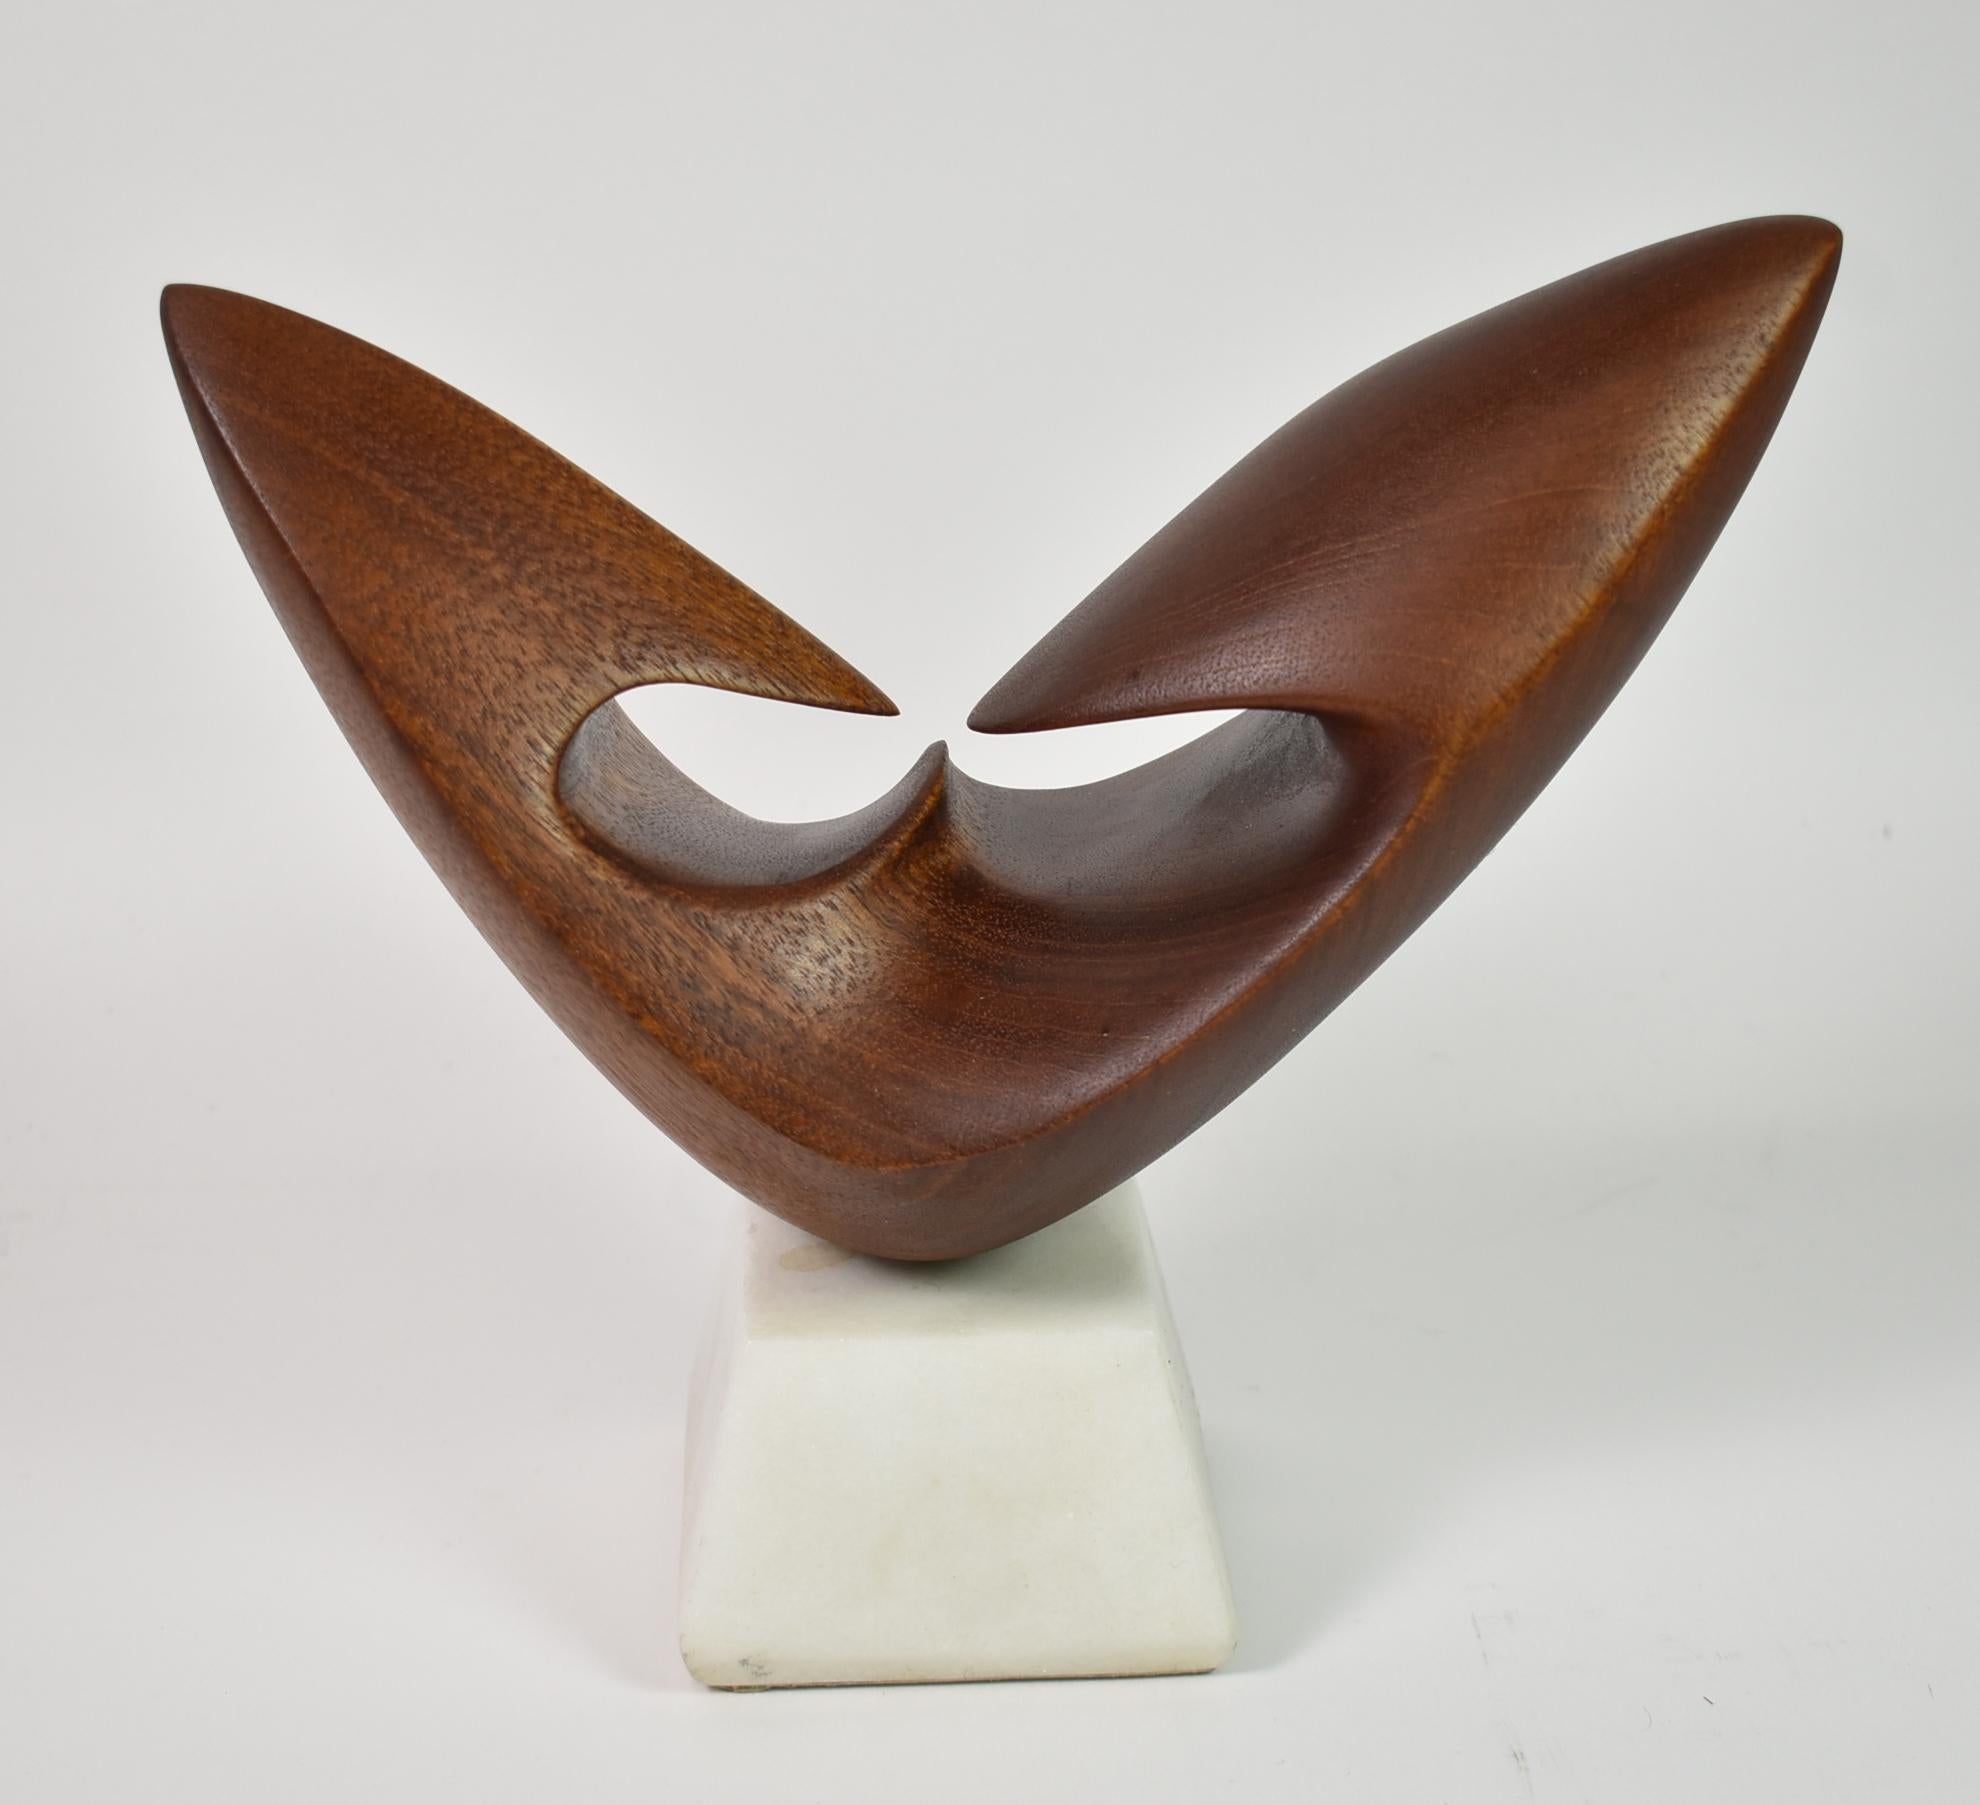 Vintage Modern carved teak sculputre, circa 1960s. Teak smooth abstract form mounted on a white granite base. Appears unmarked. Excellent condition. Base measures: 2.5